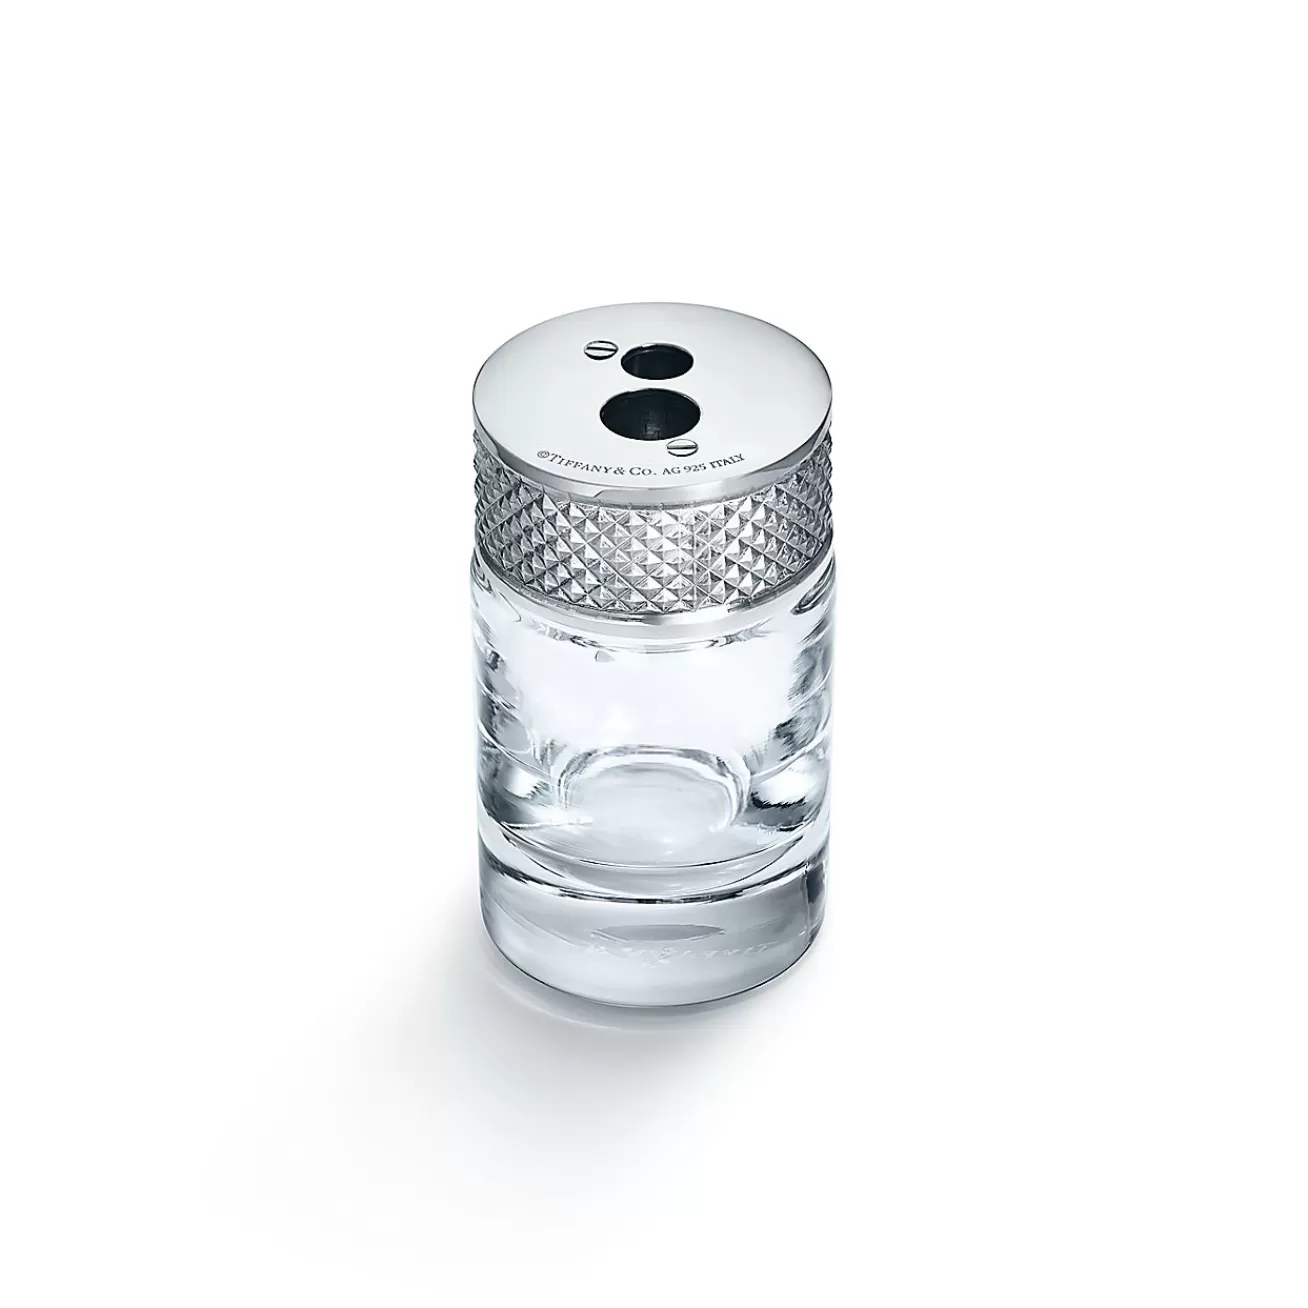 Tiffany & Co. Shop Everyday Objects Sterling Silver Pencil Sharpener | ^ Him | Gifts for Him